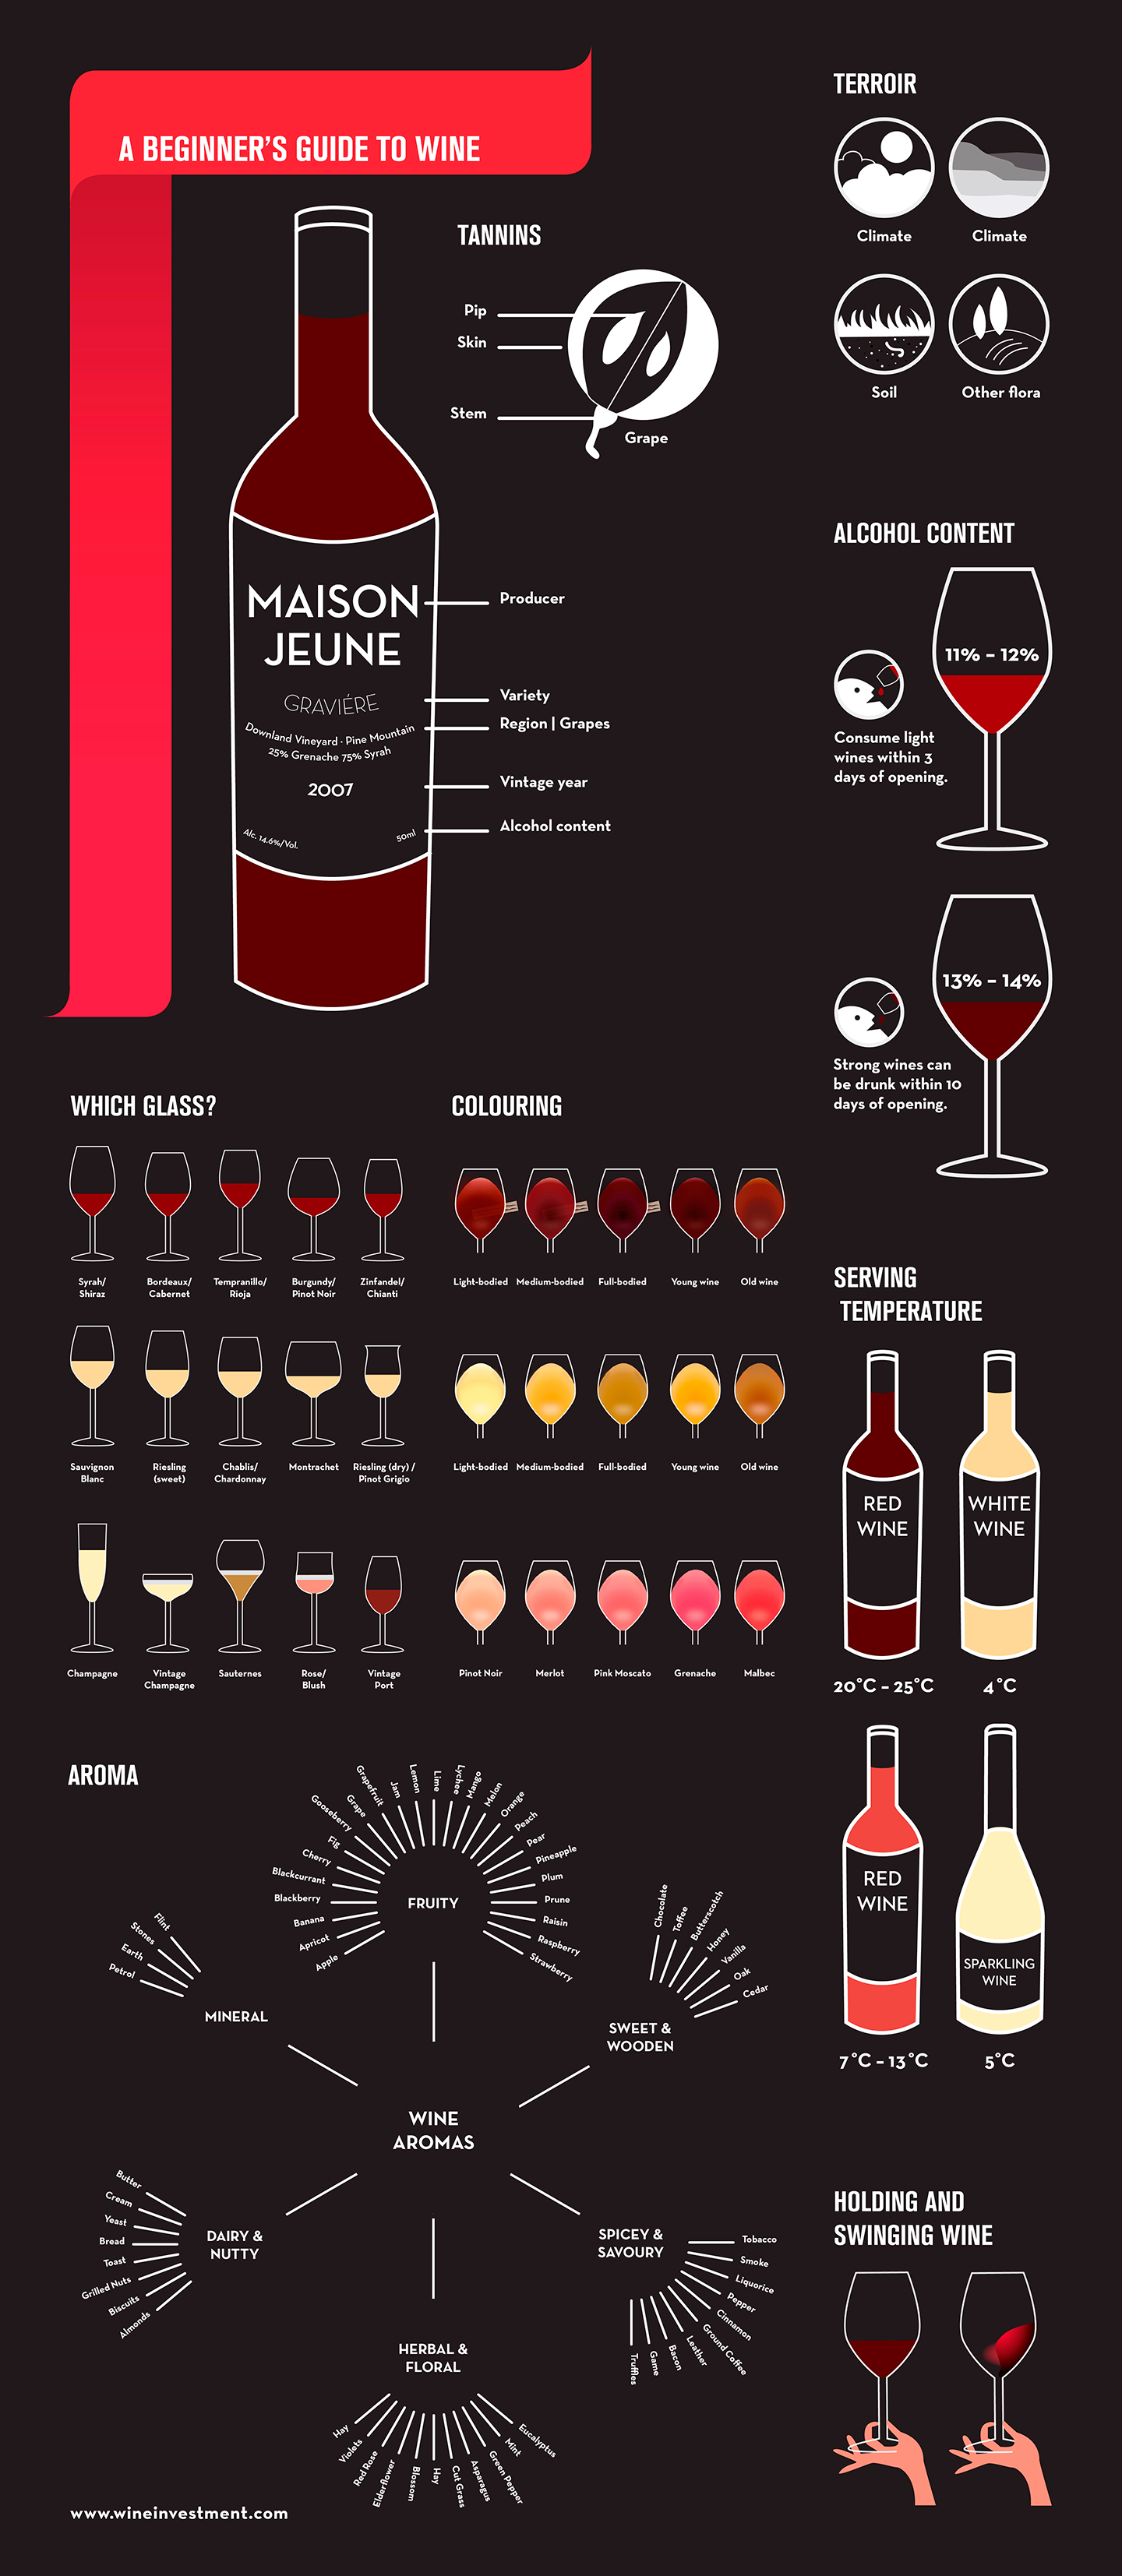 A beginners guide to wine